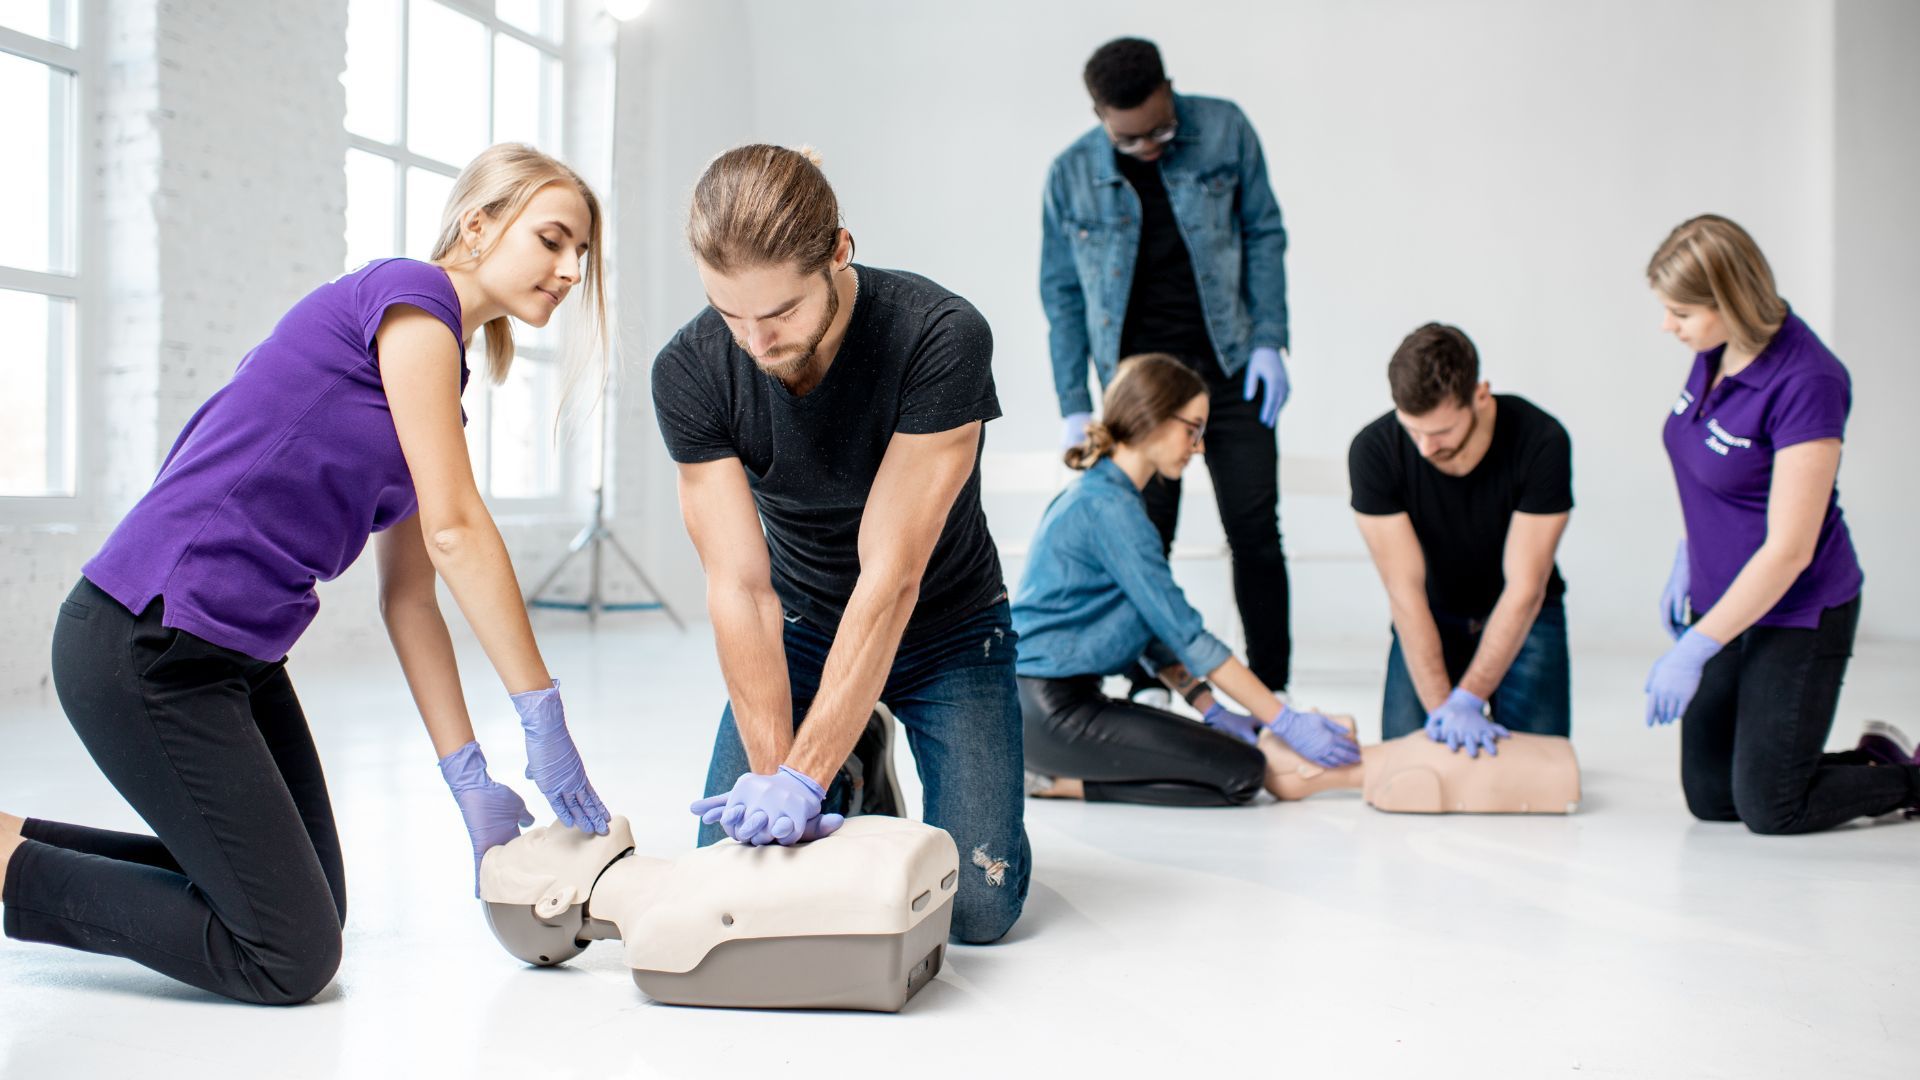 How To Become CPR Certified: Steps And Benefits